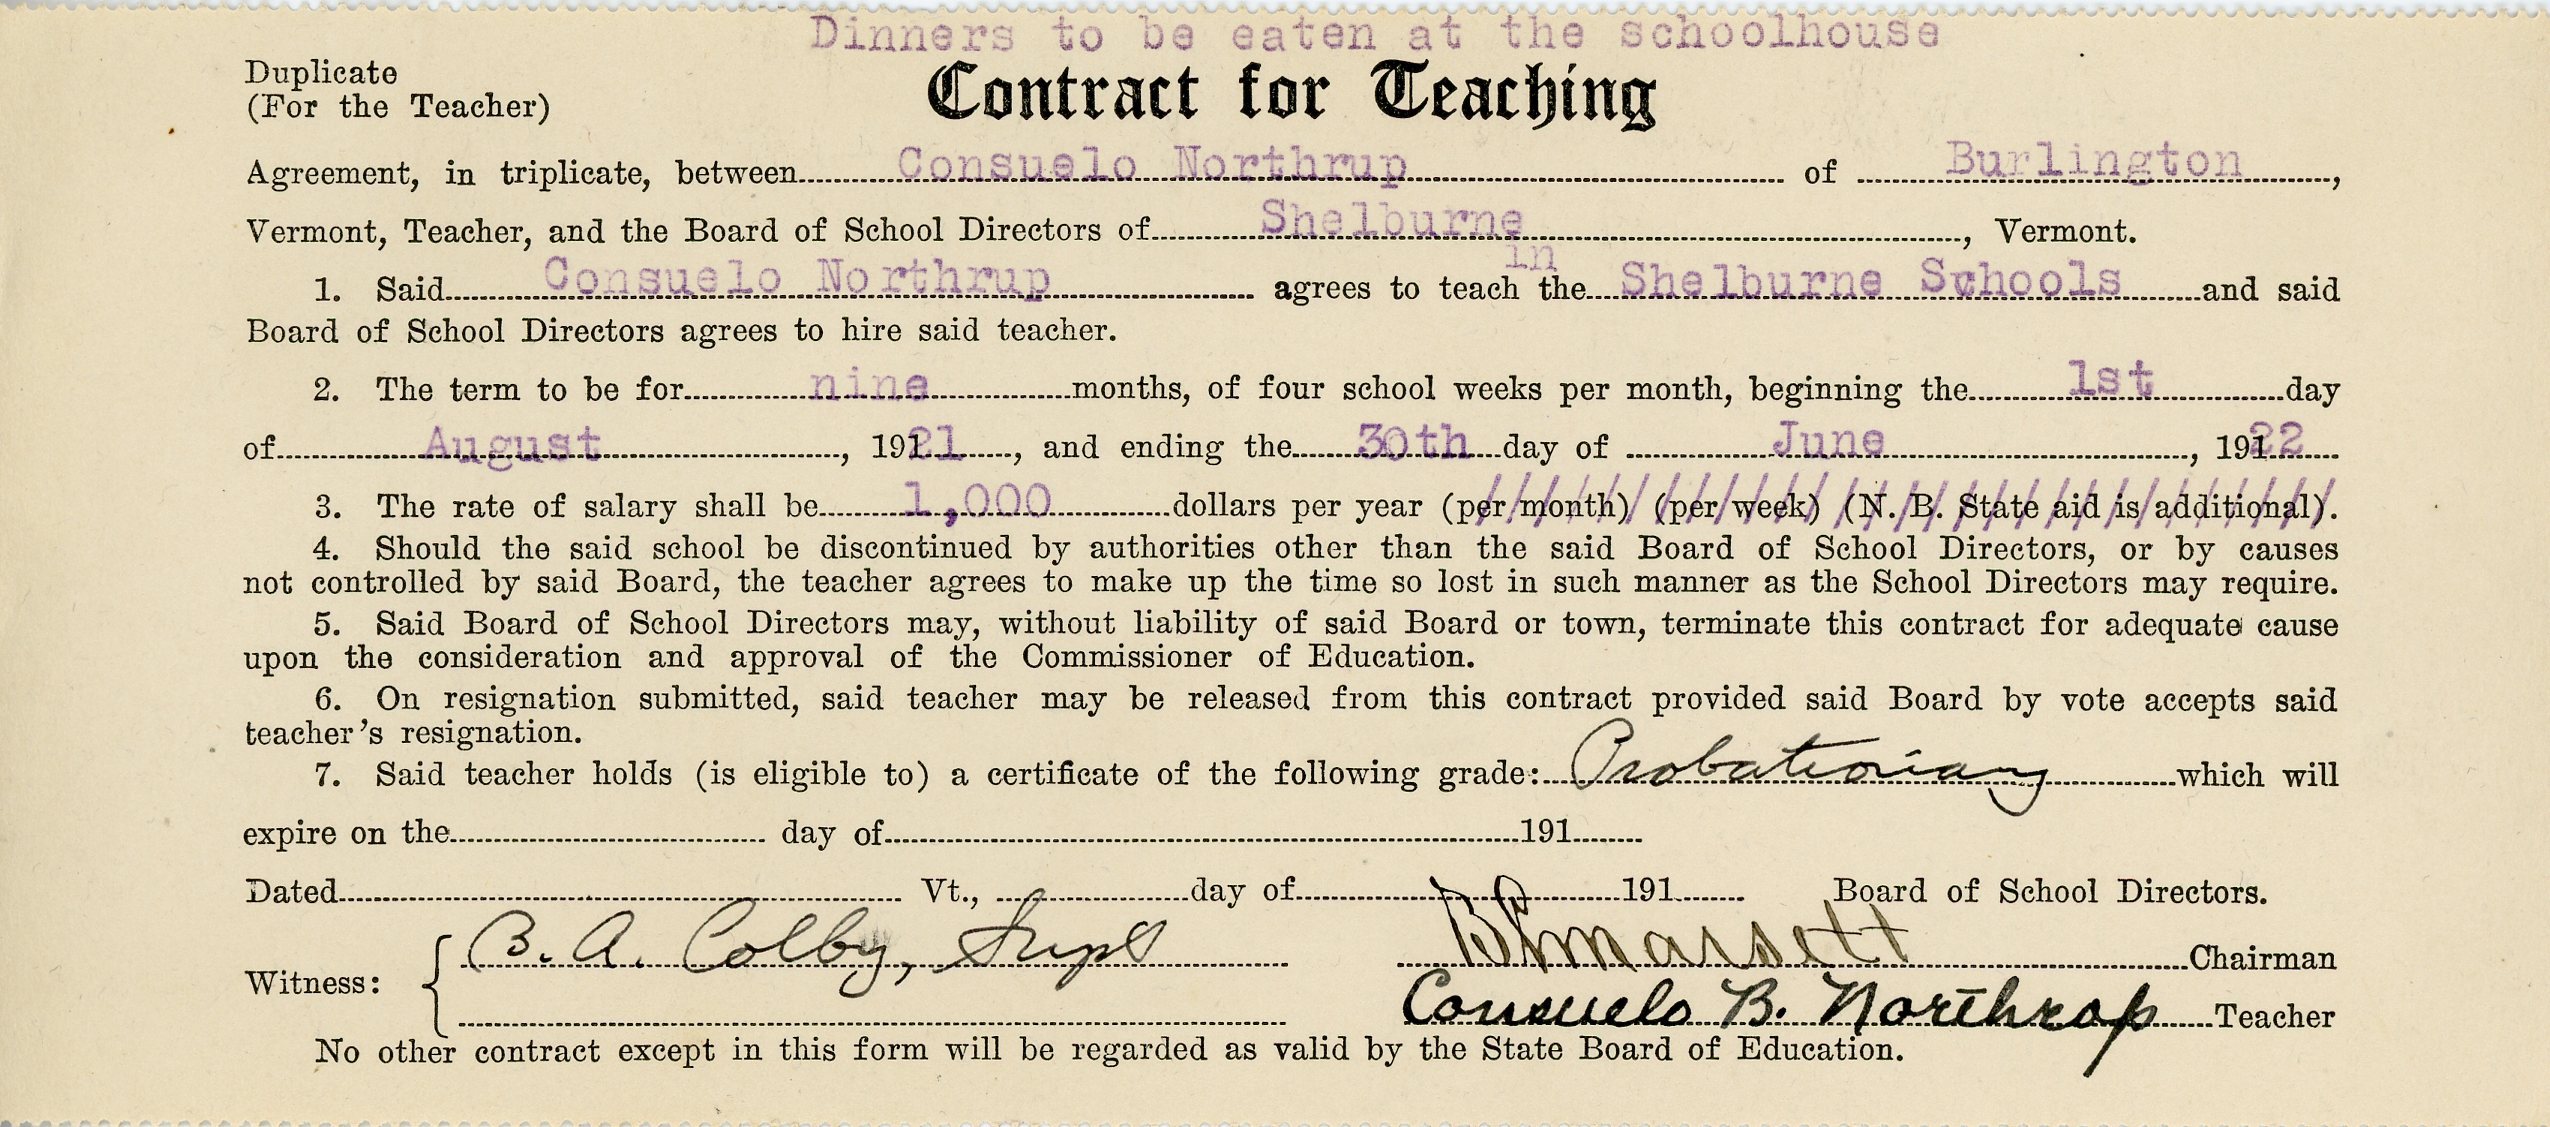 Vermont State Board of Education Contract for Teaching